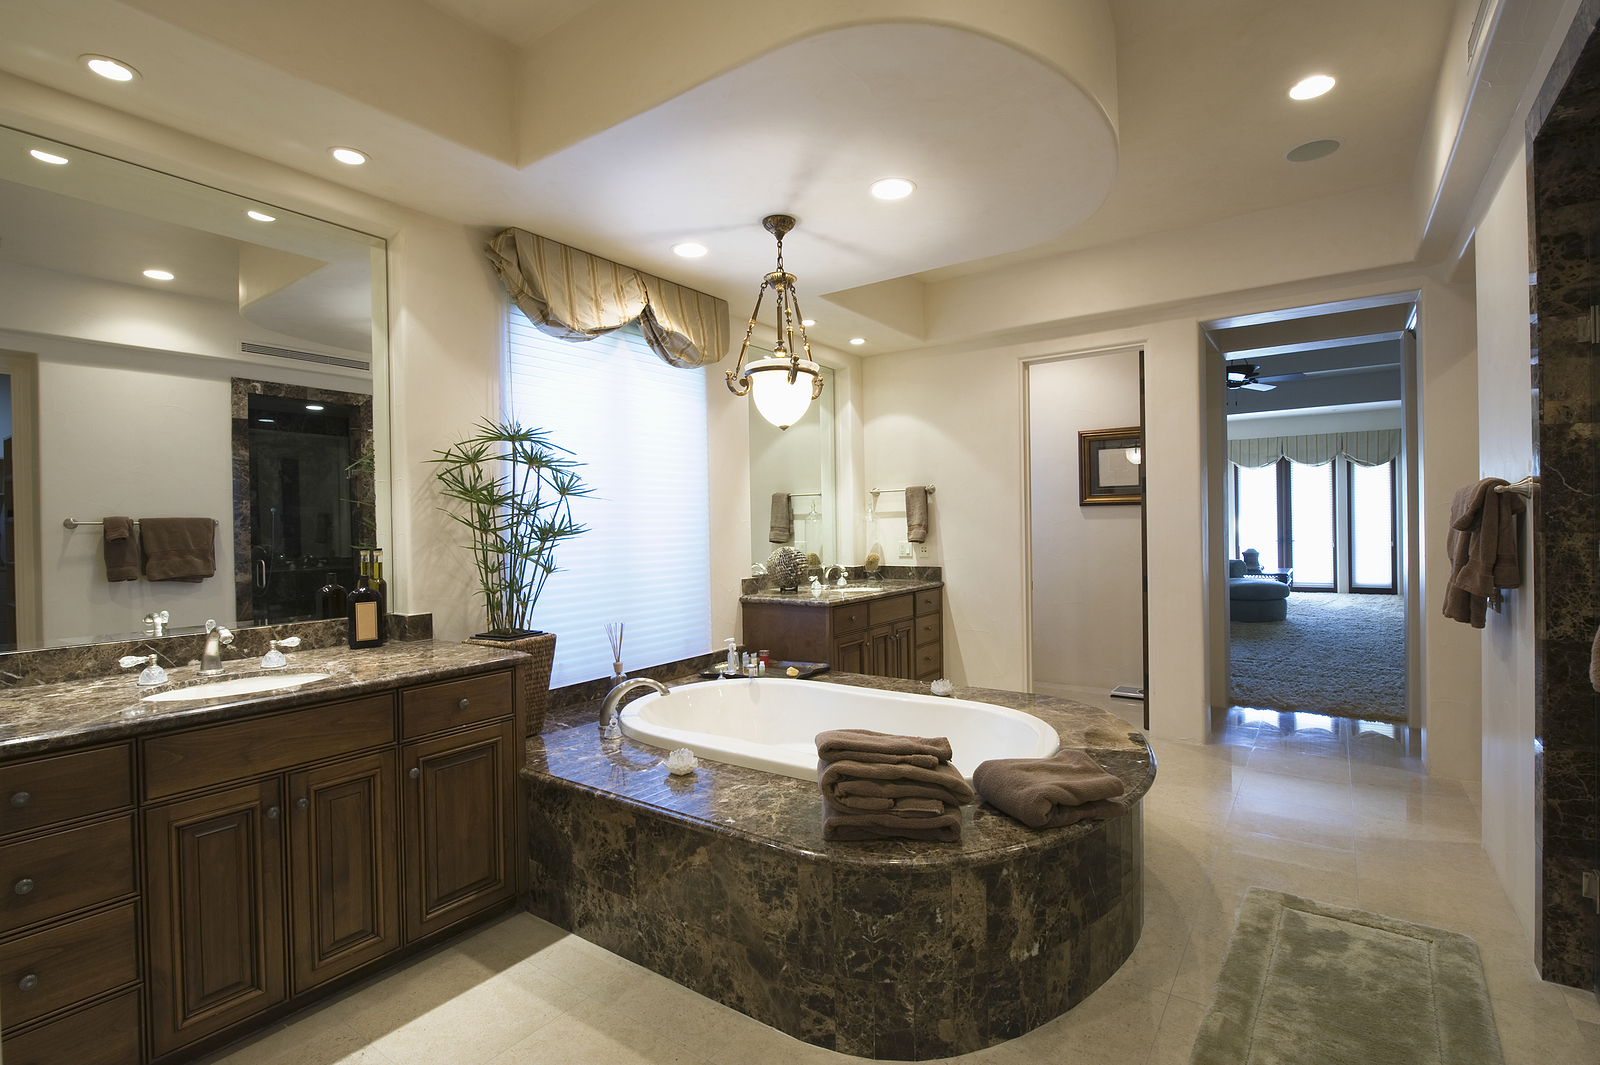 View of a modern and spacious bathroom at home